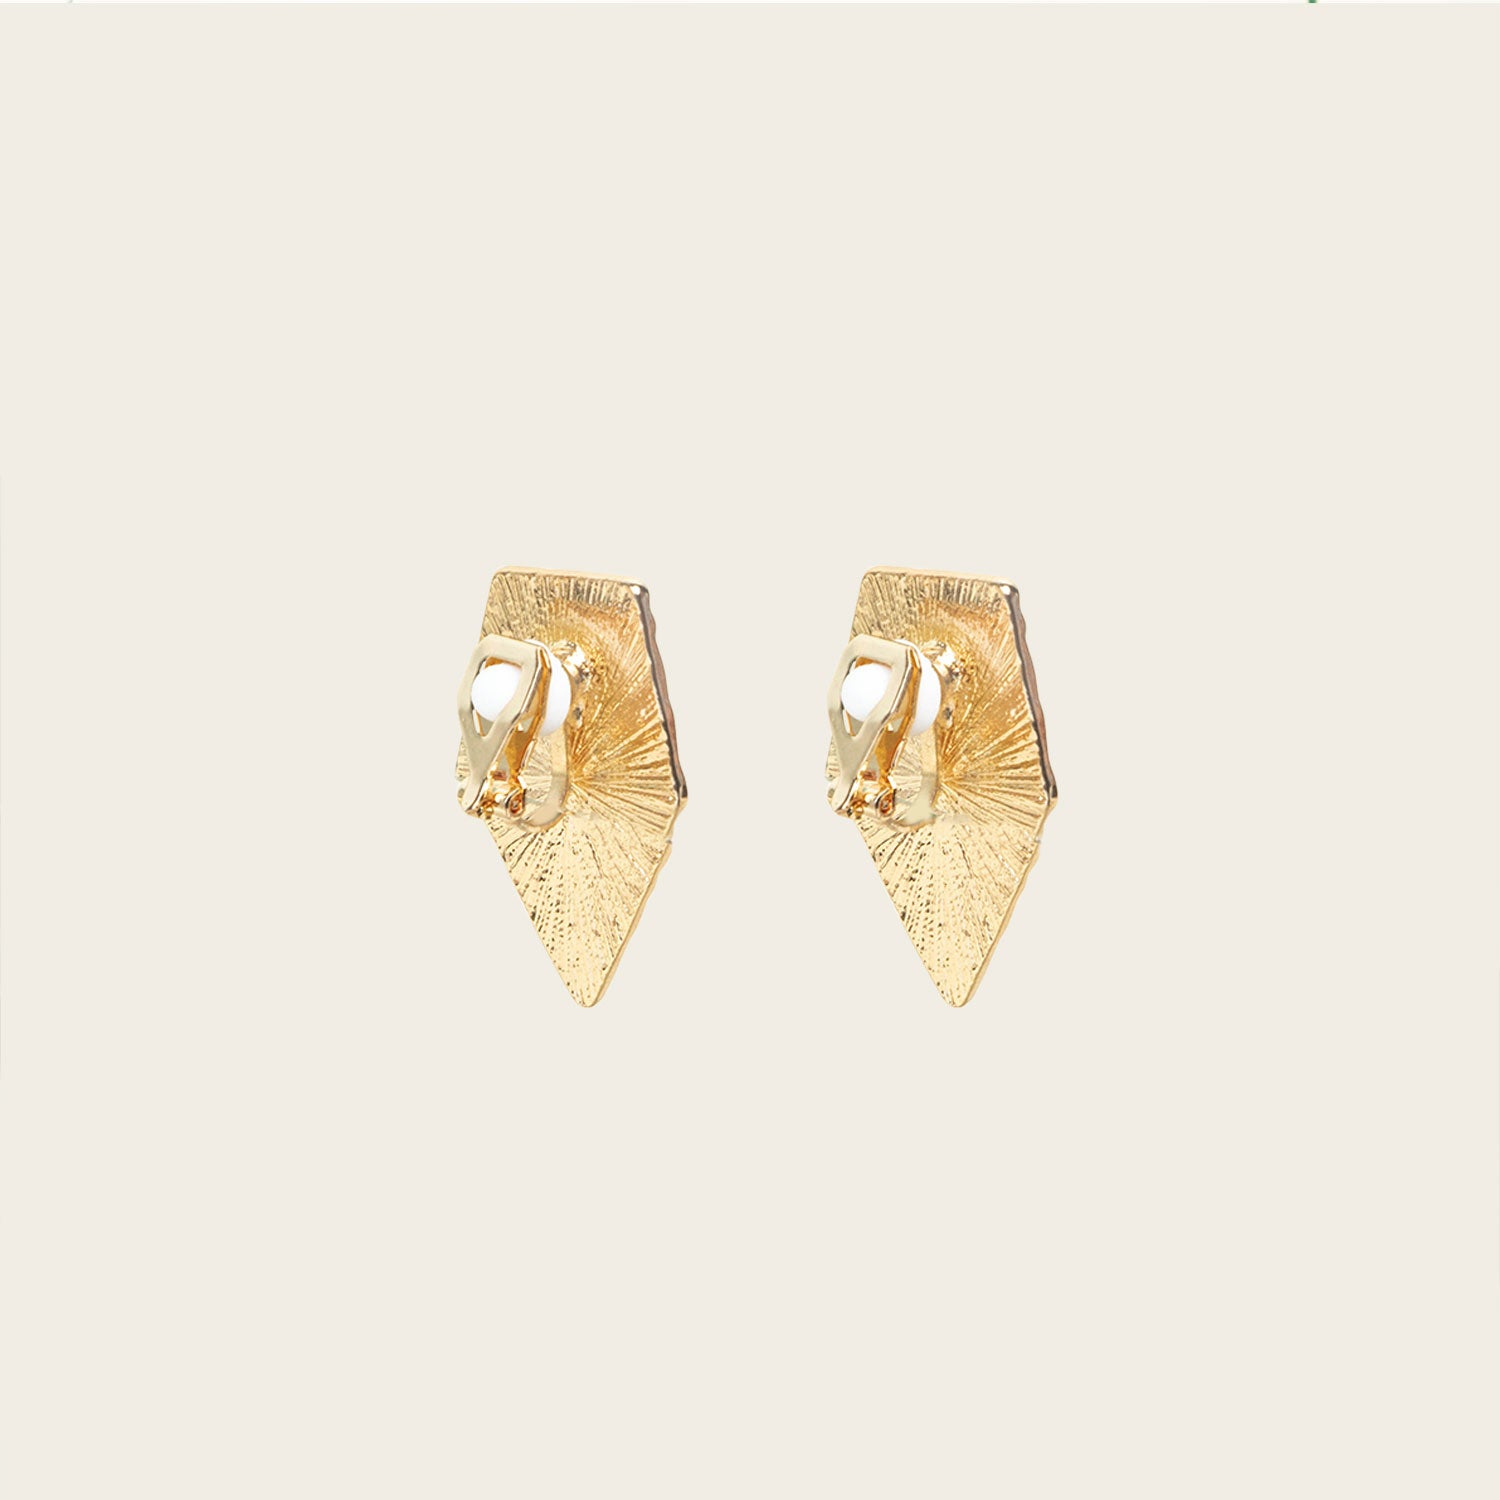 Image of the Vesper Clip On Earrings in Gold boast a secure padded clip-on closure, suitable for all ear types, with hold strength designed to last 8-12 hours. Crafted from zinc alloy and copper alloy, this single pair is adjustable and comfortable to wear.